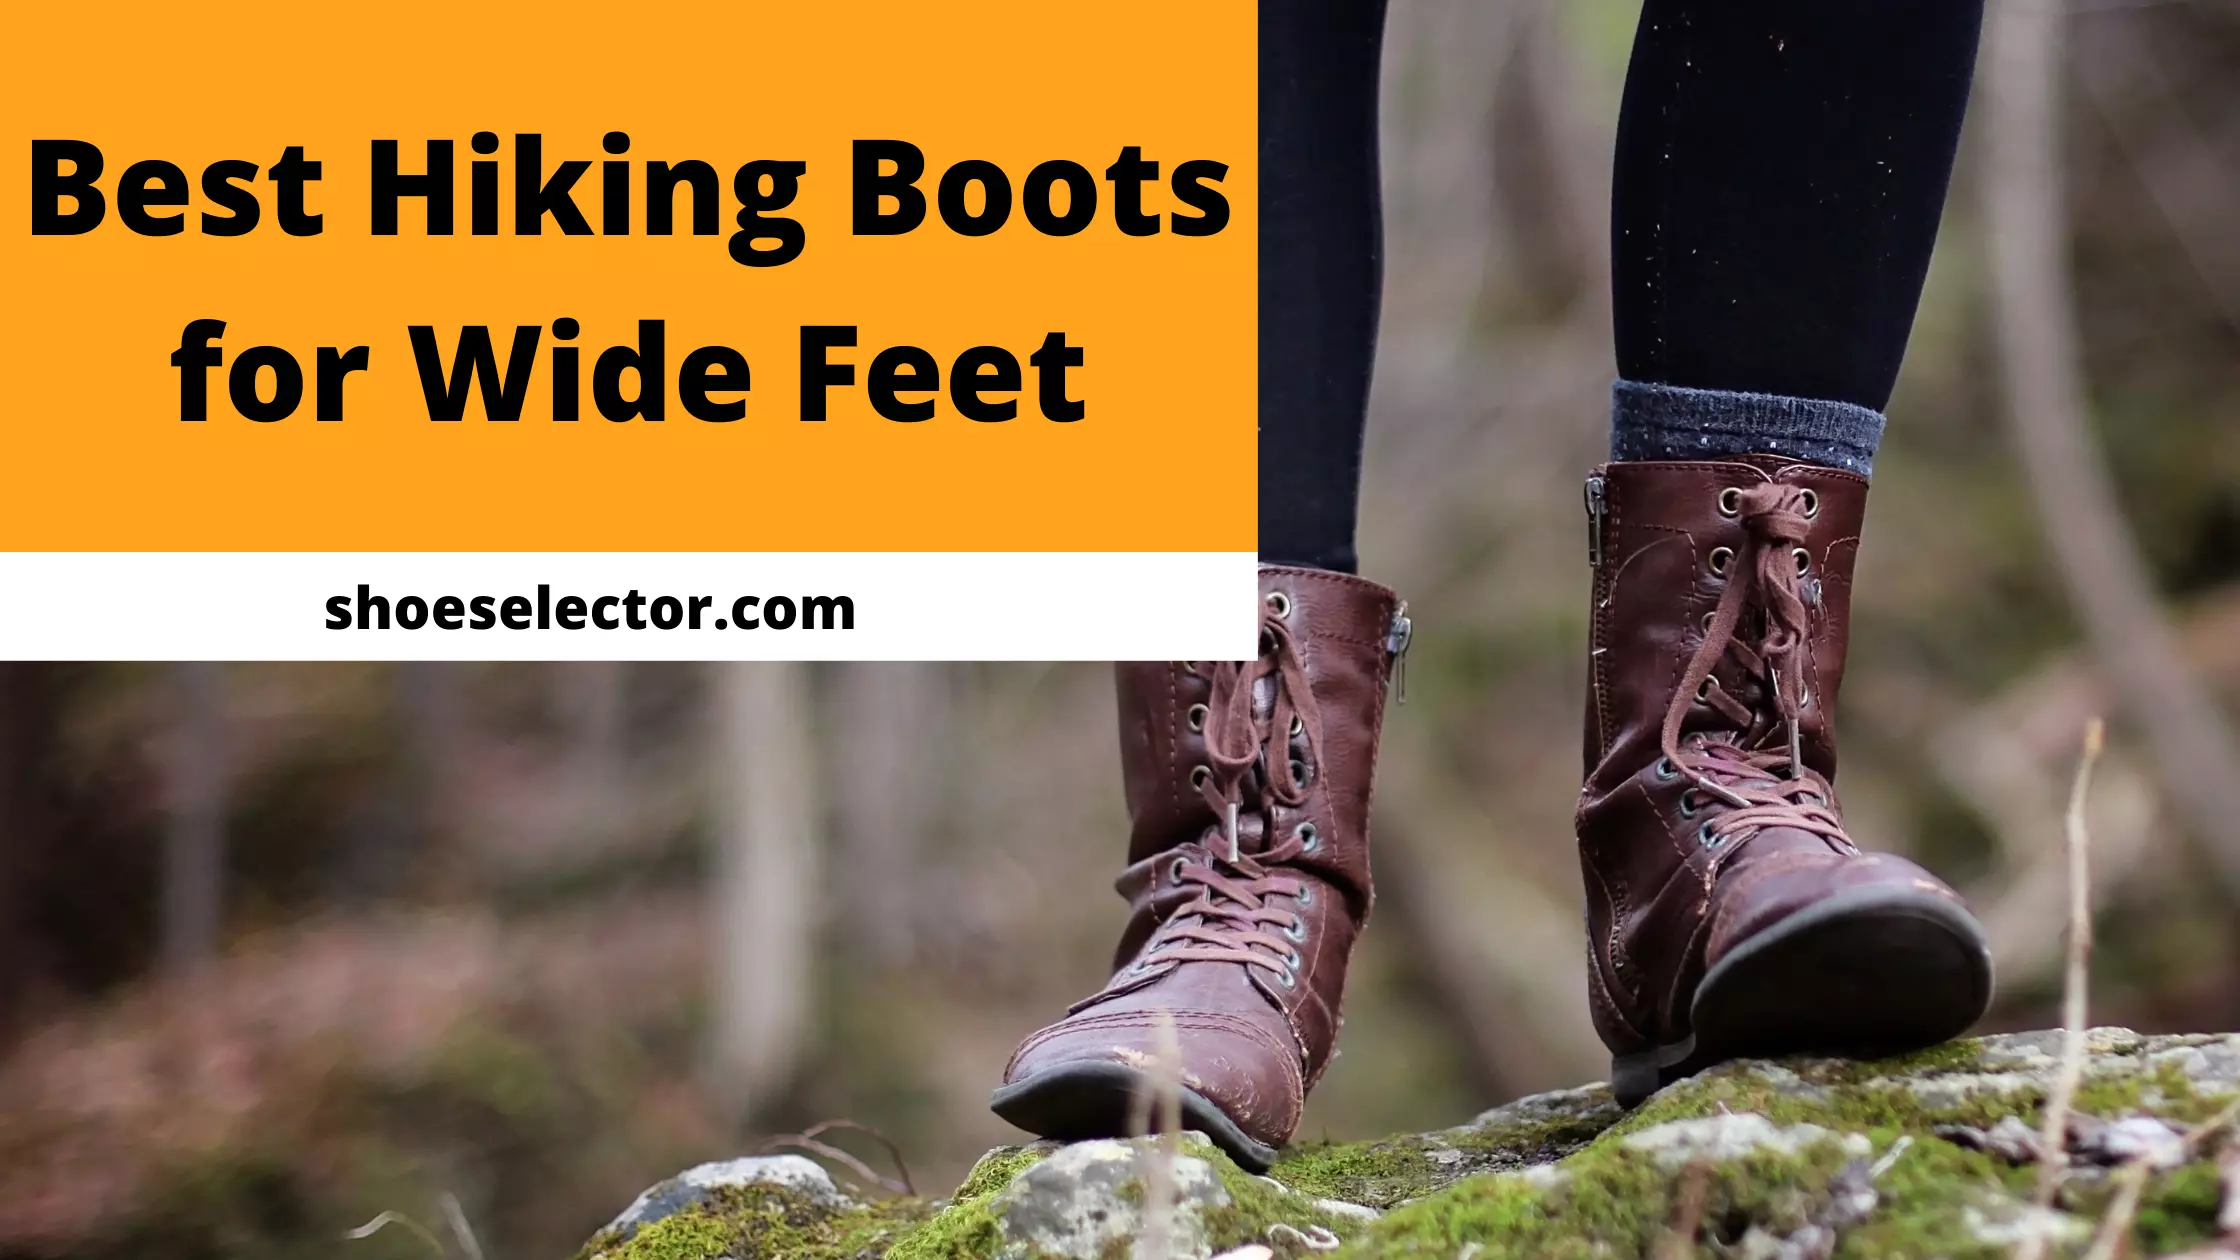 Best Hiking Boots For Wide Feet - Complete Guide